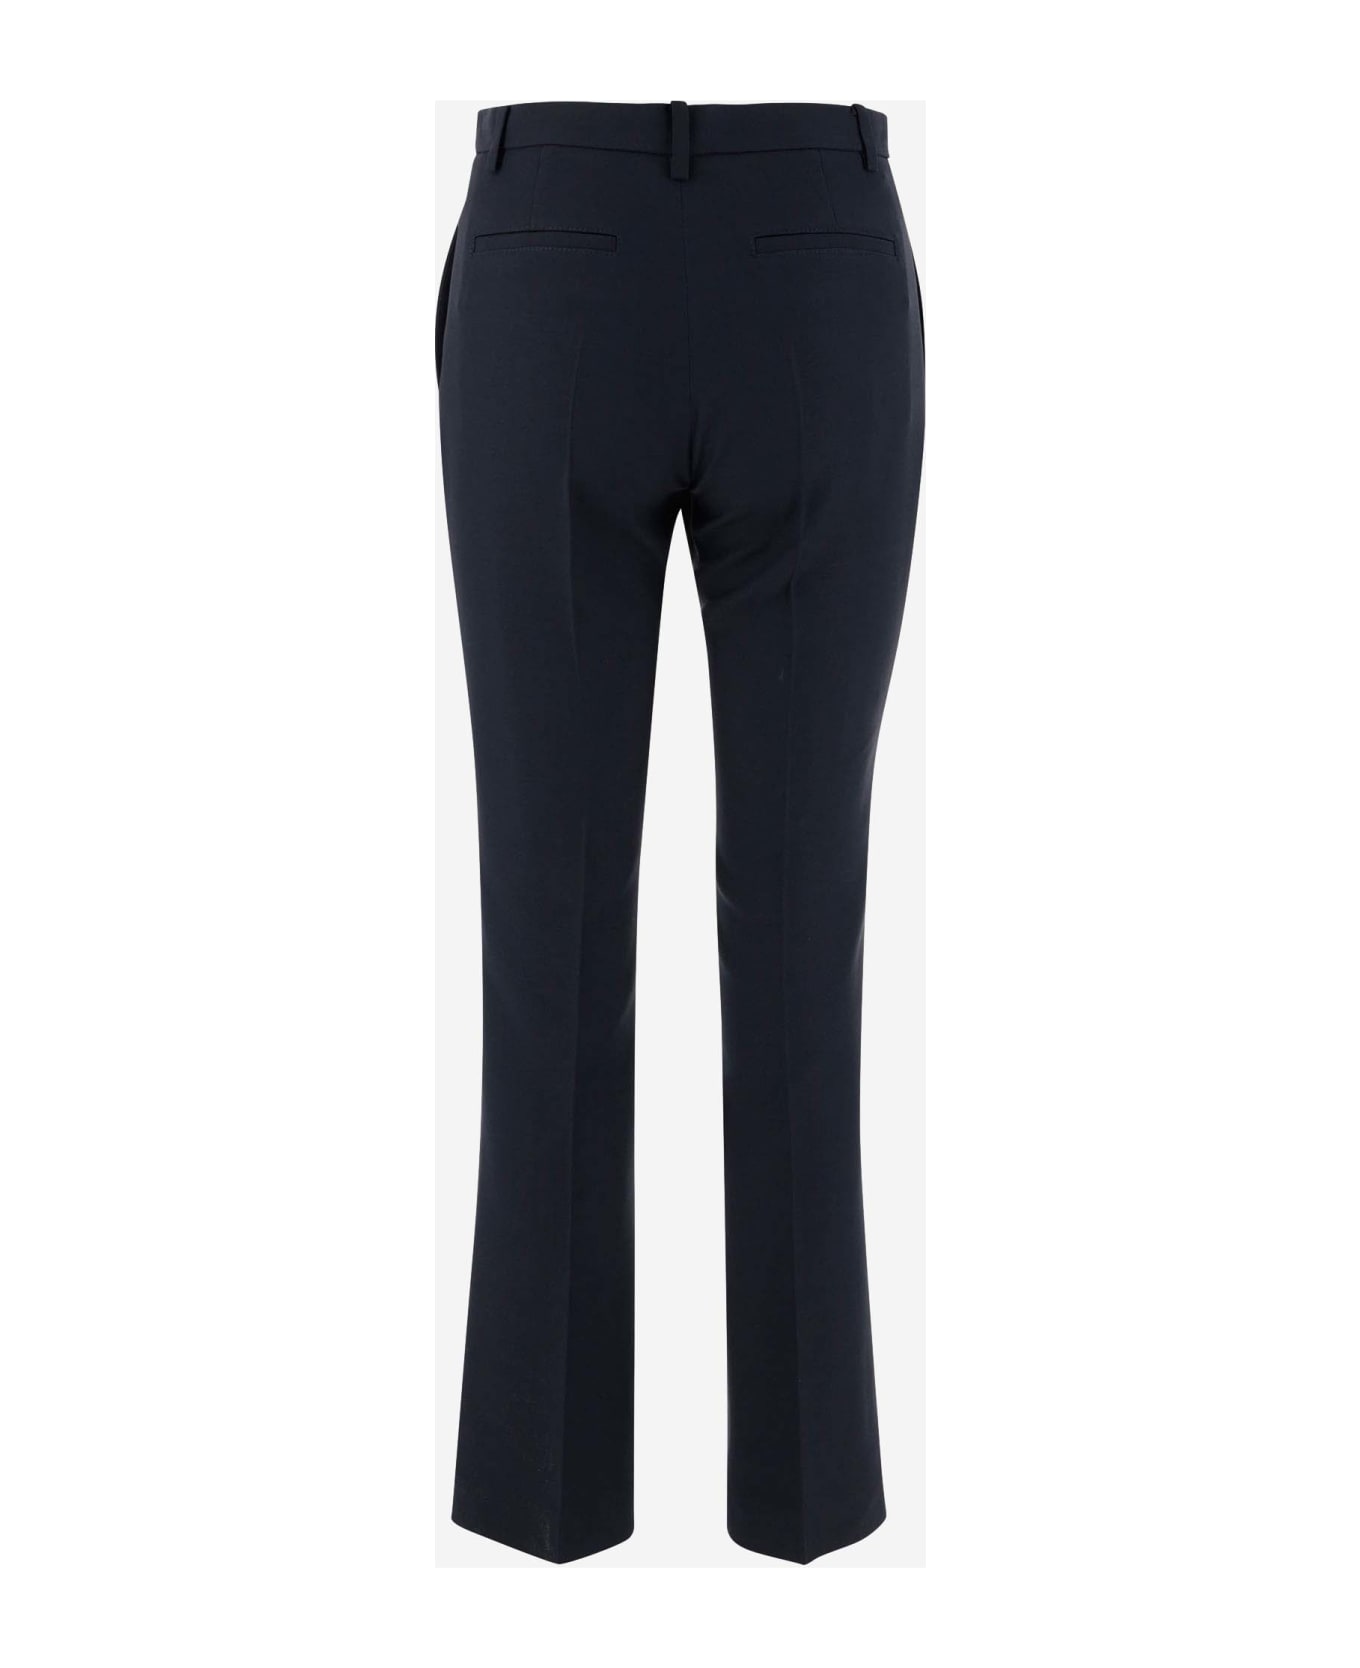 Valentino Crepe Couture Tailored Pants - Blue